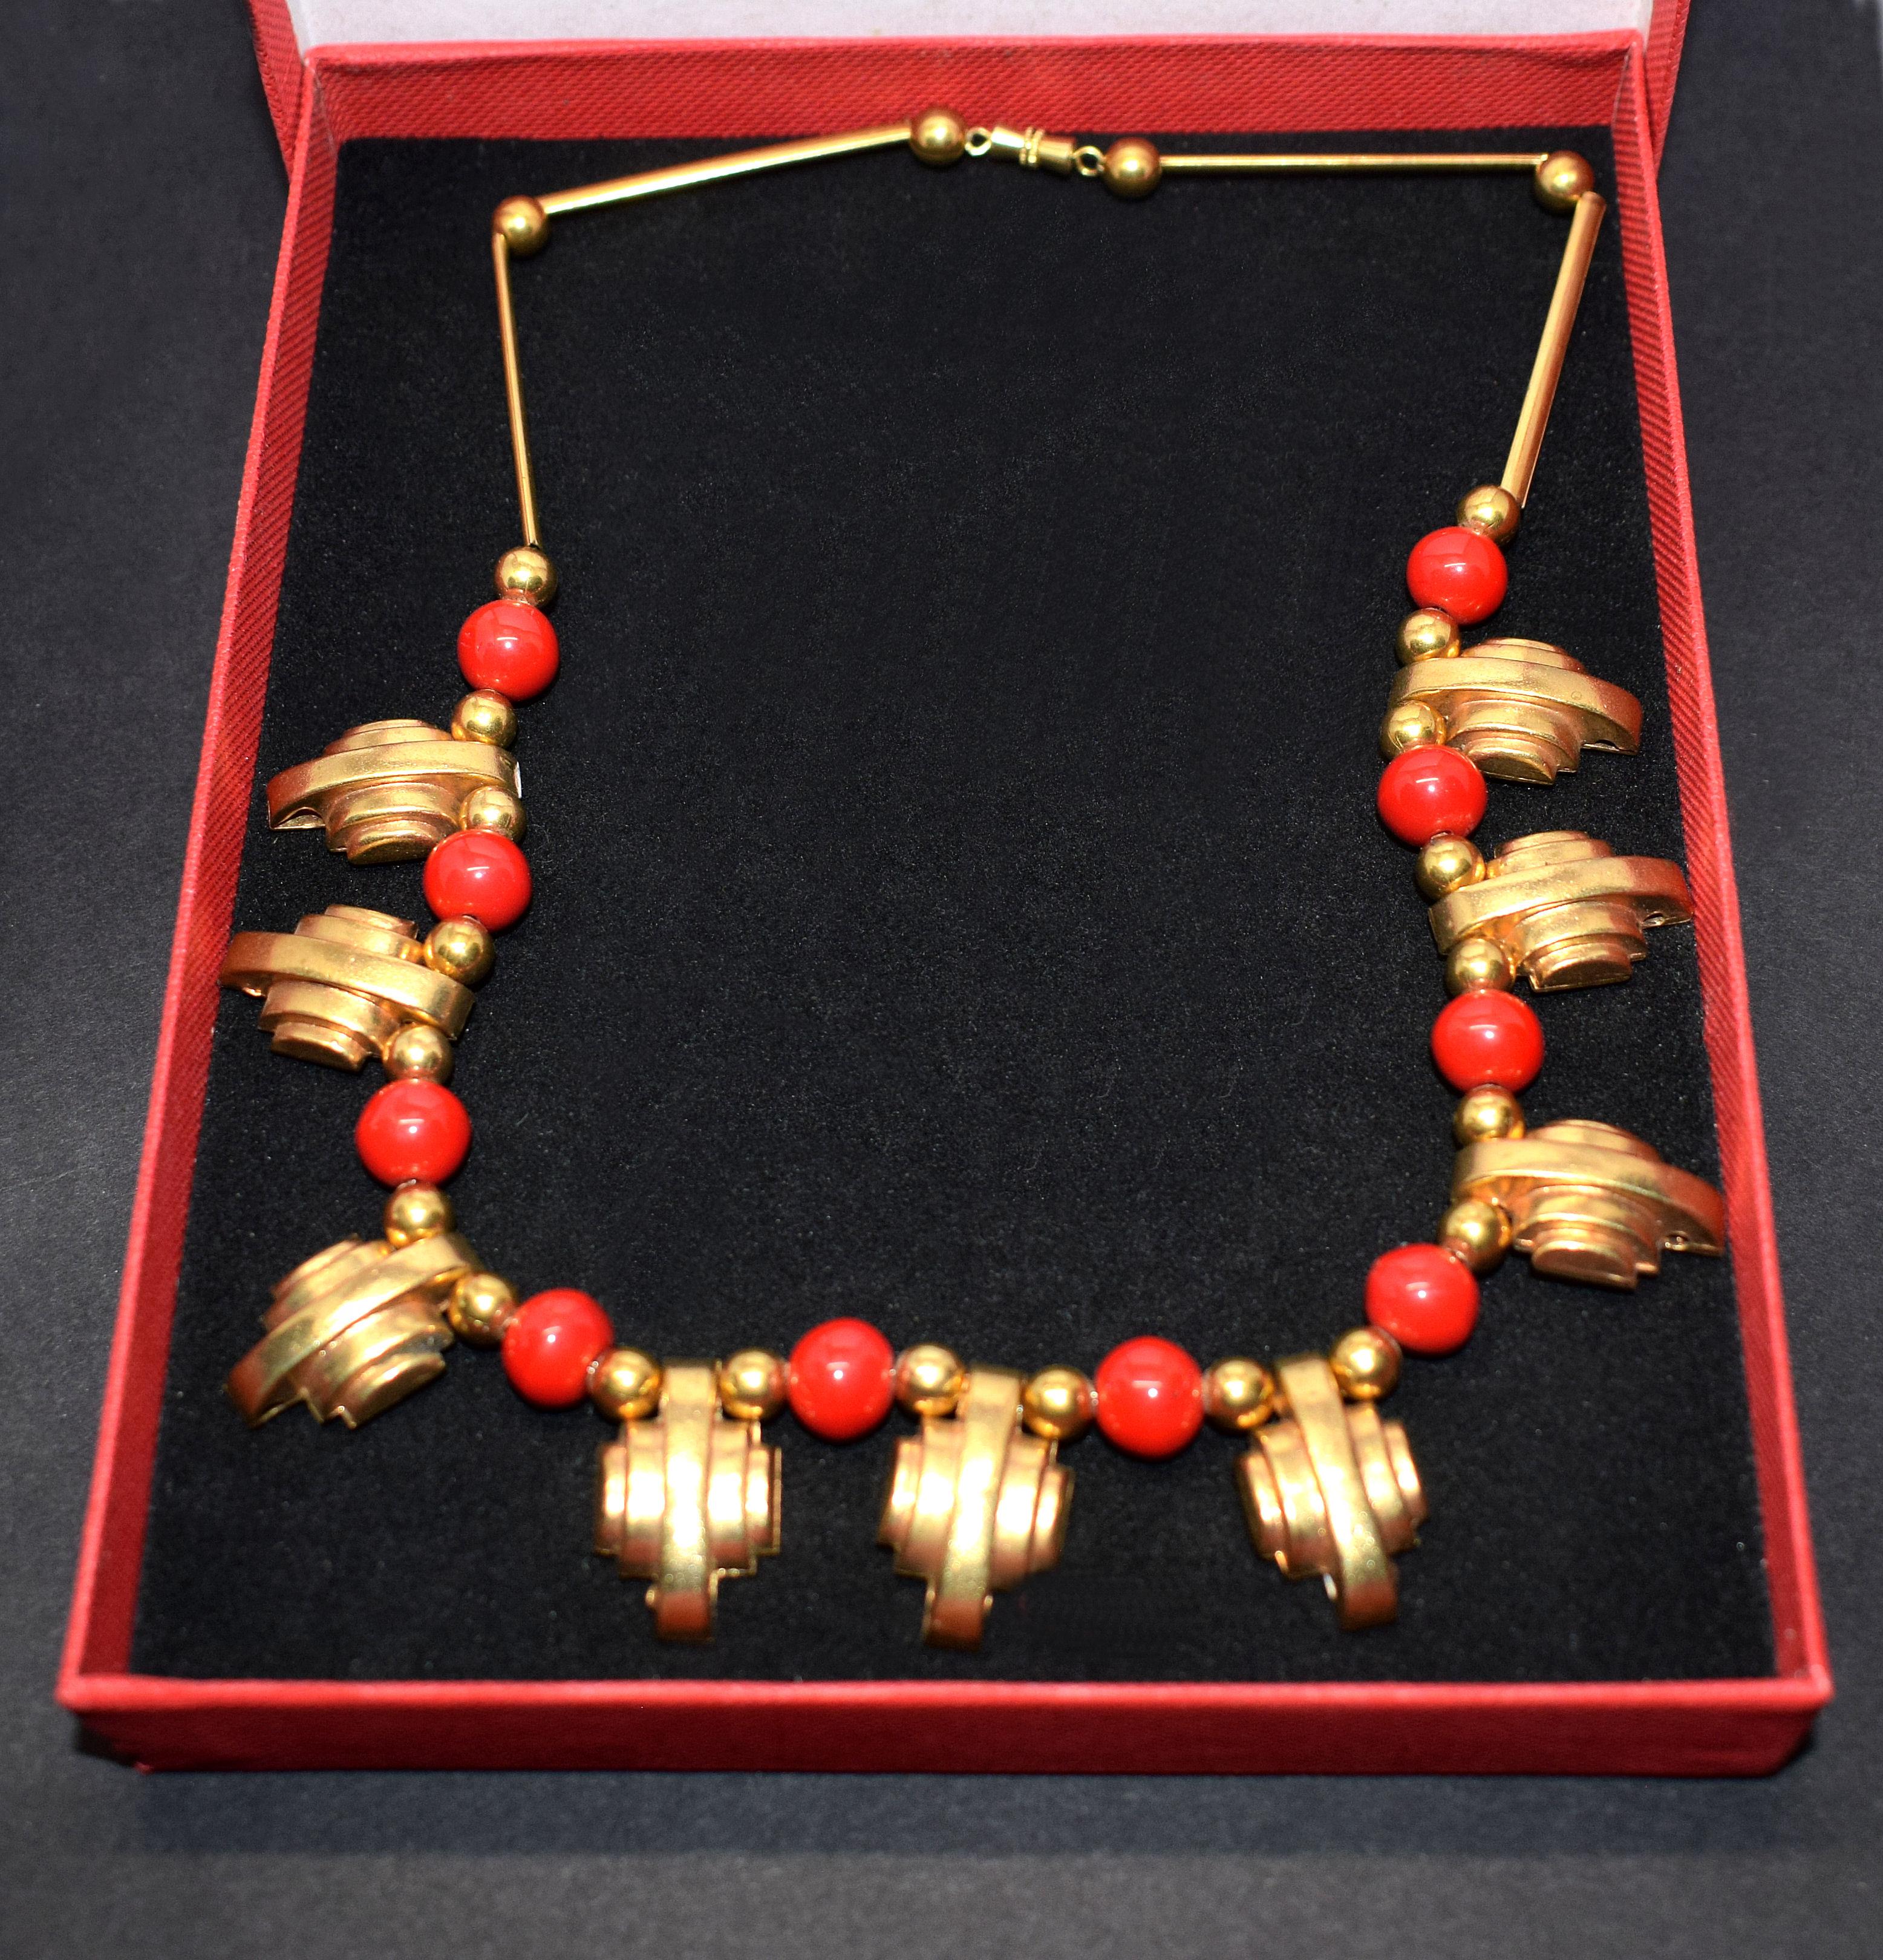 Timeless Art Deco ladies necklace dating to the 1930's. Gold tone metal makes up the body of the necklace with streamline odeon shaped pieces and alternating berry red galalith balls. So easily integrated with today's modern fashion savvy lady which